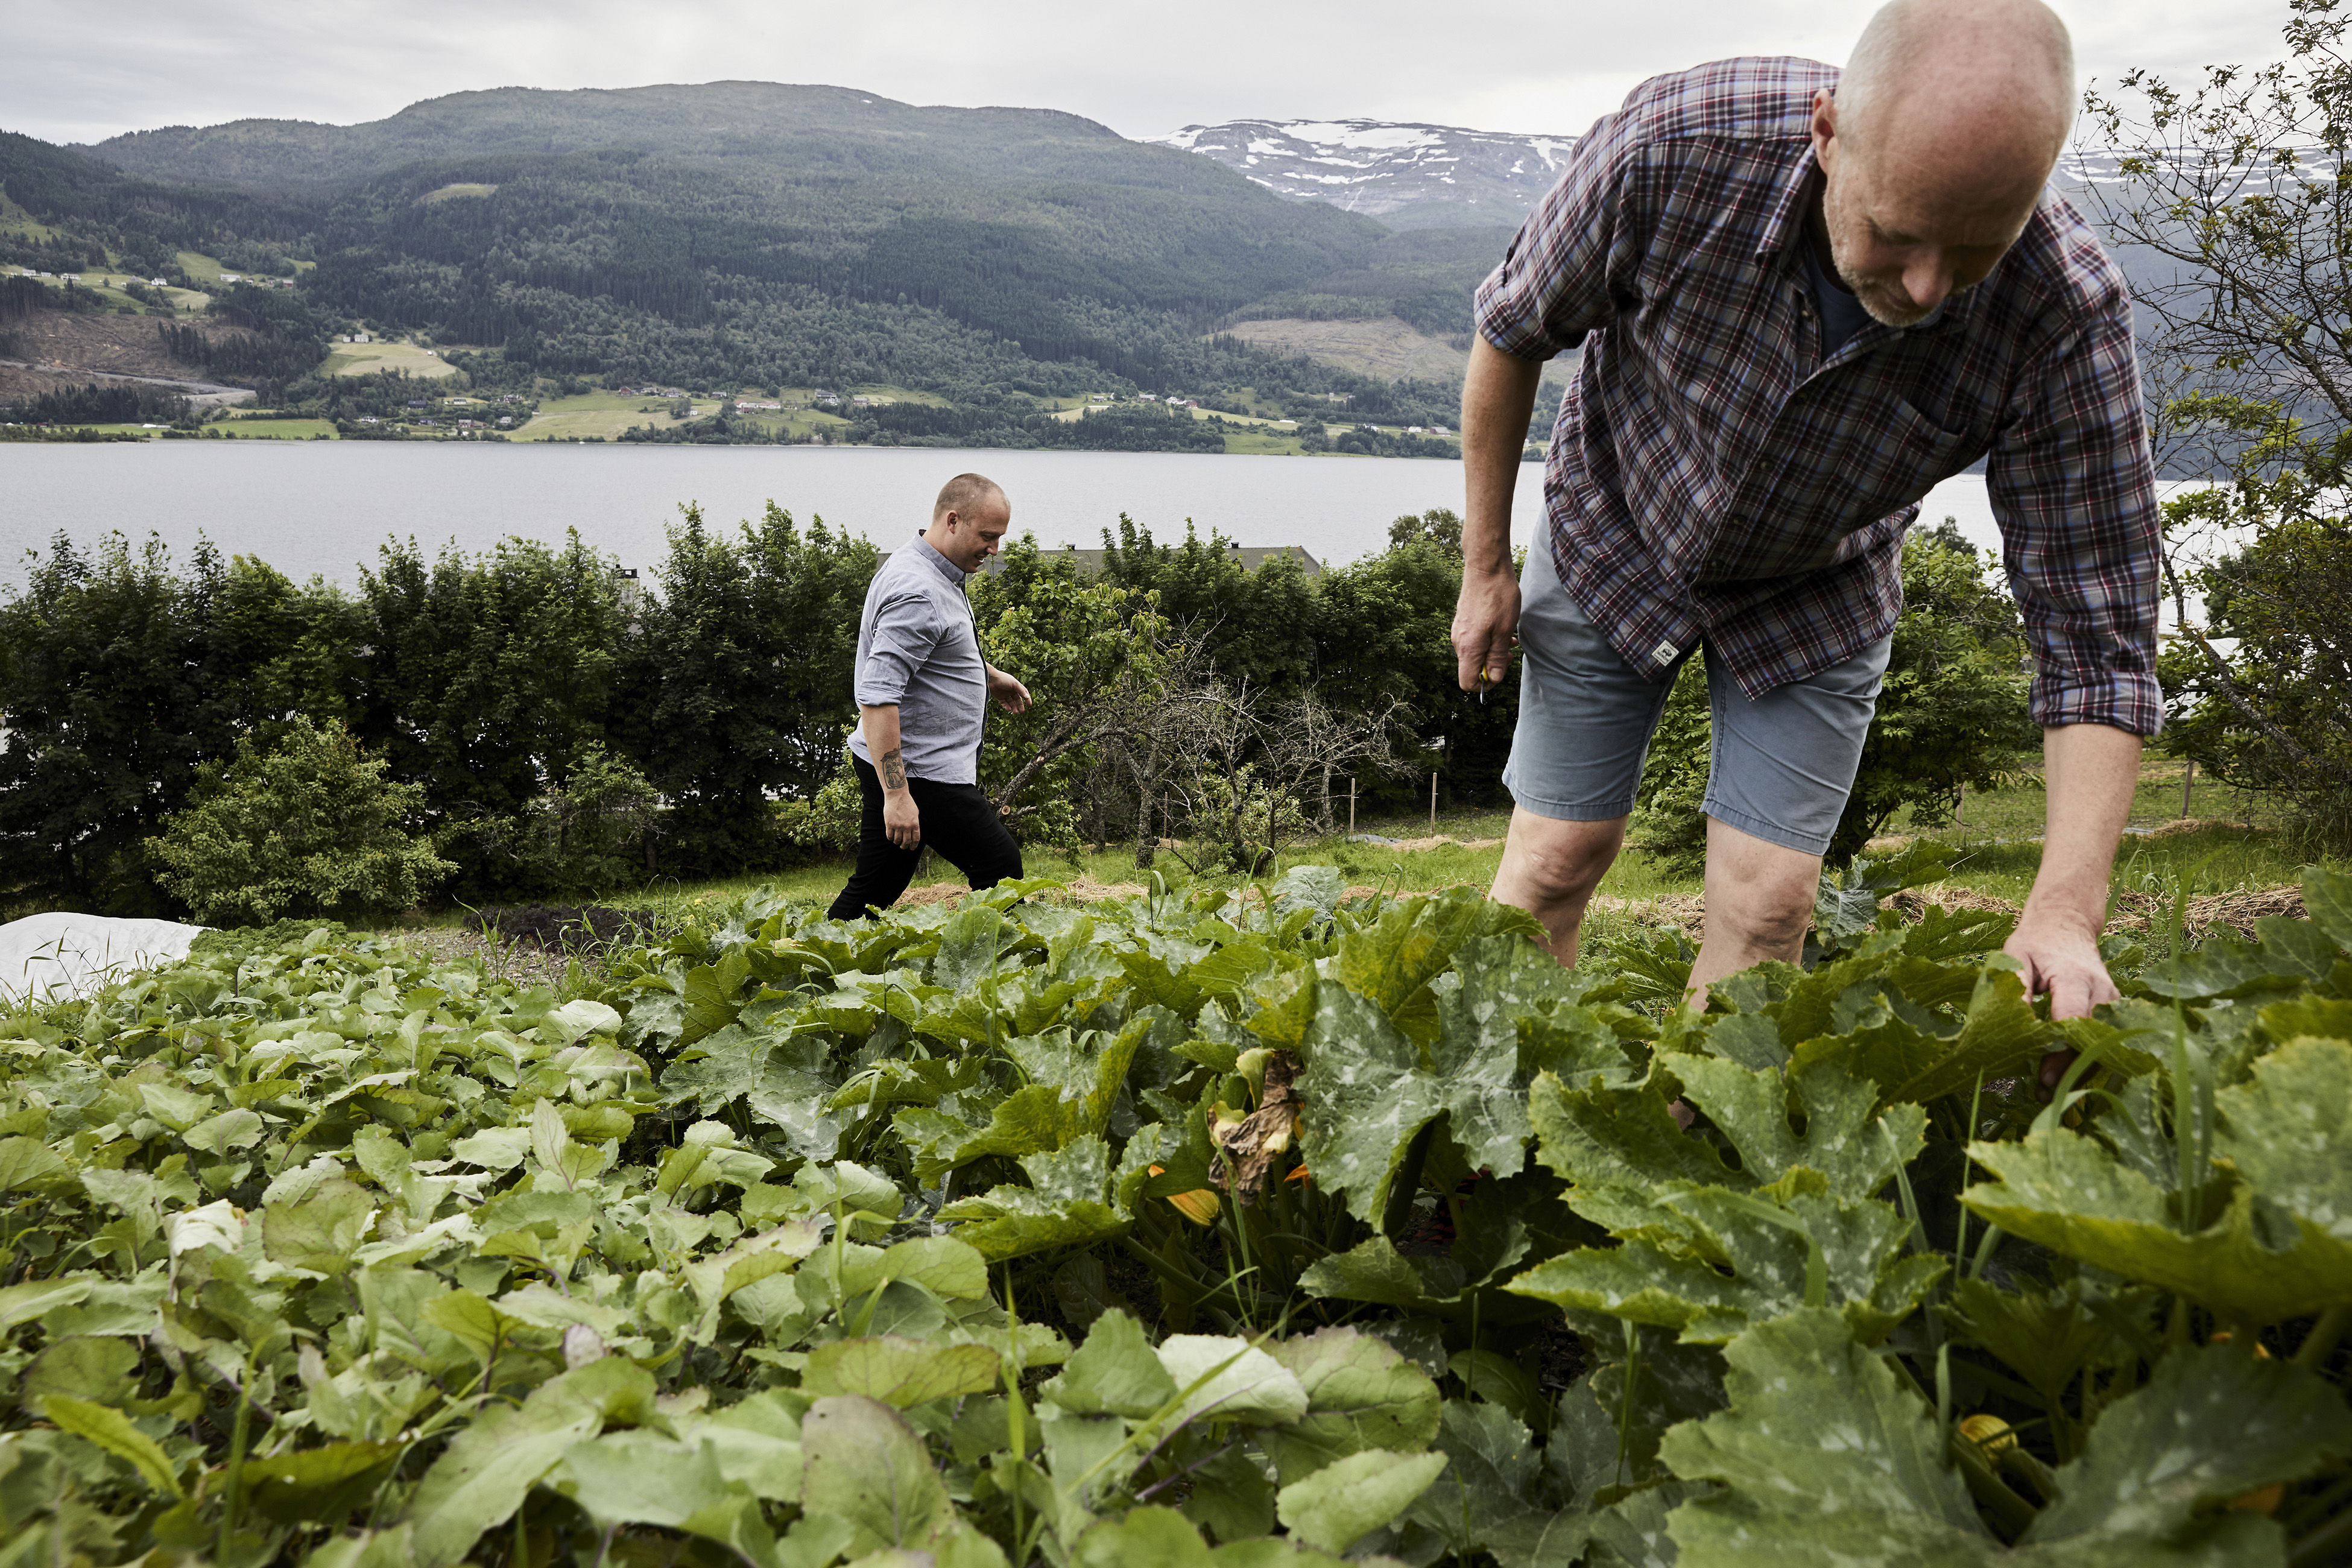 Knut Finne, right, at his farm, a source of fresh produce for the restaurant of Christopher Haatuft, left, in Voss, Norway, July, 2017. New Nordic chefs are guided by solemn manifestoes about nature and culture, and often restrict themselves to Scandinavian ingredients. Haatuft, who is the opposite of solemn, coined a new term for the food at his restaurant: neo-fjordic. (David B. Torch/The New York Times)